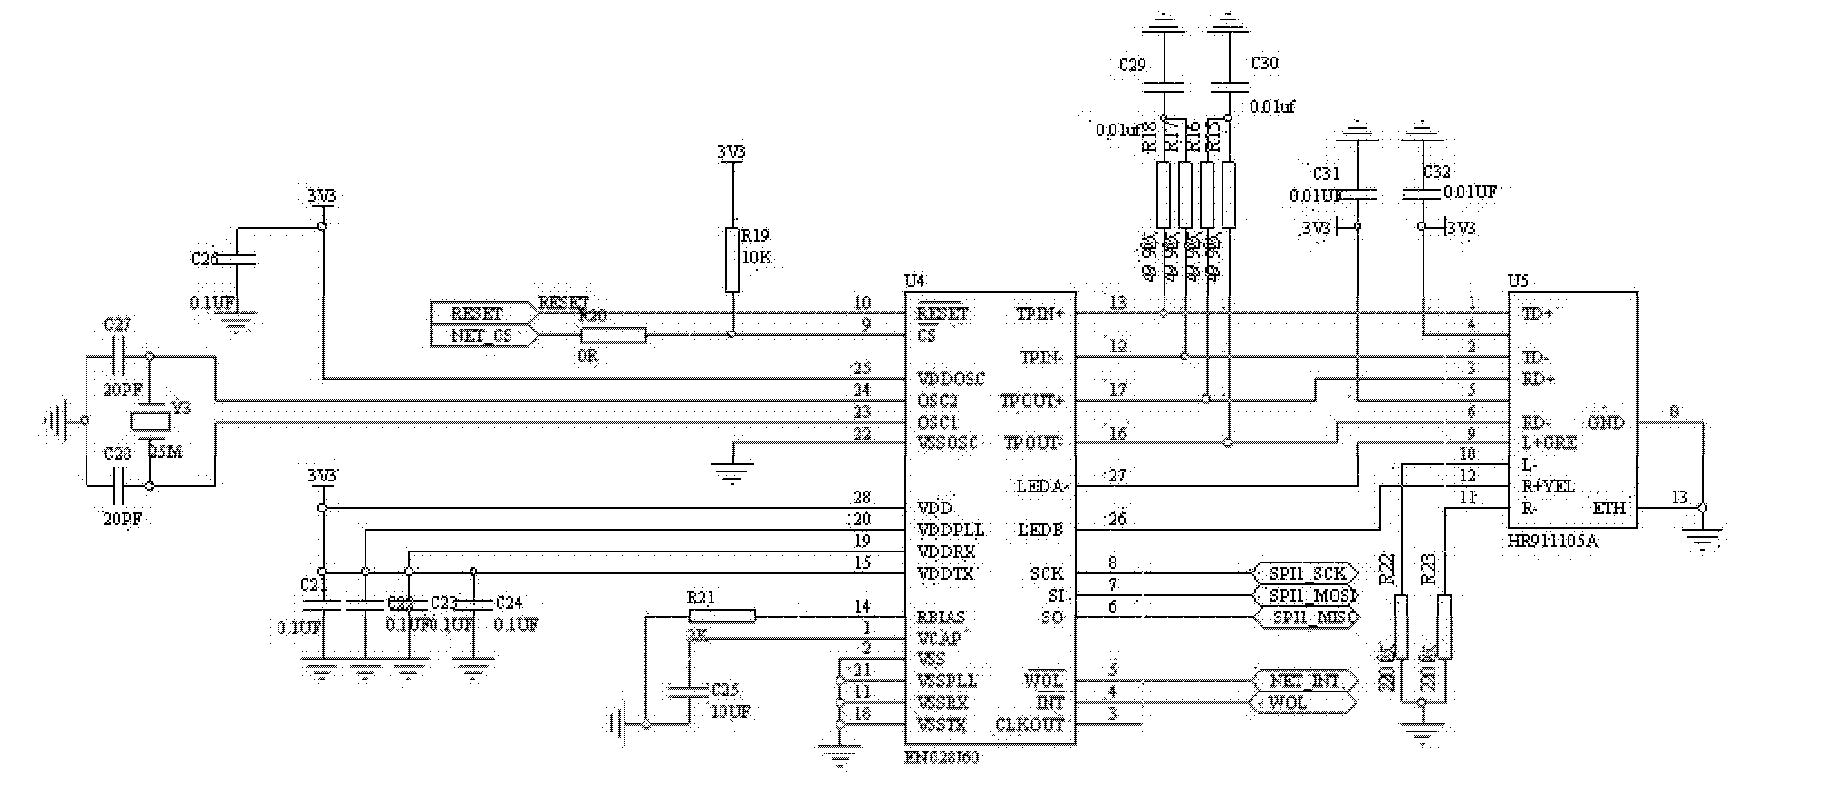 Intrinsically safe network voice controller for mining